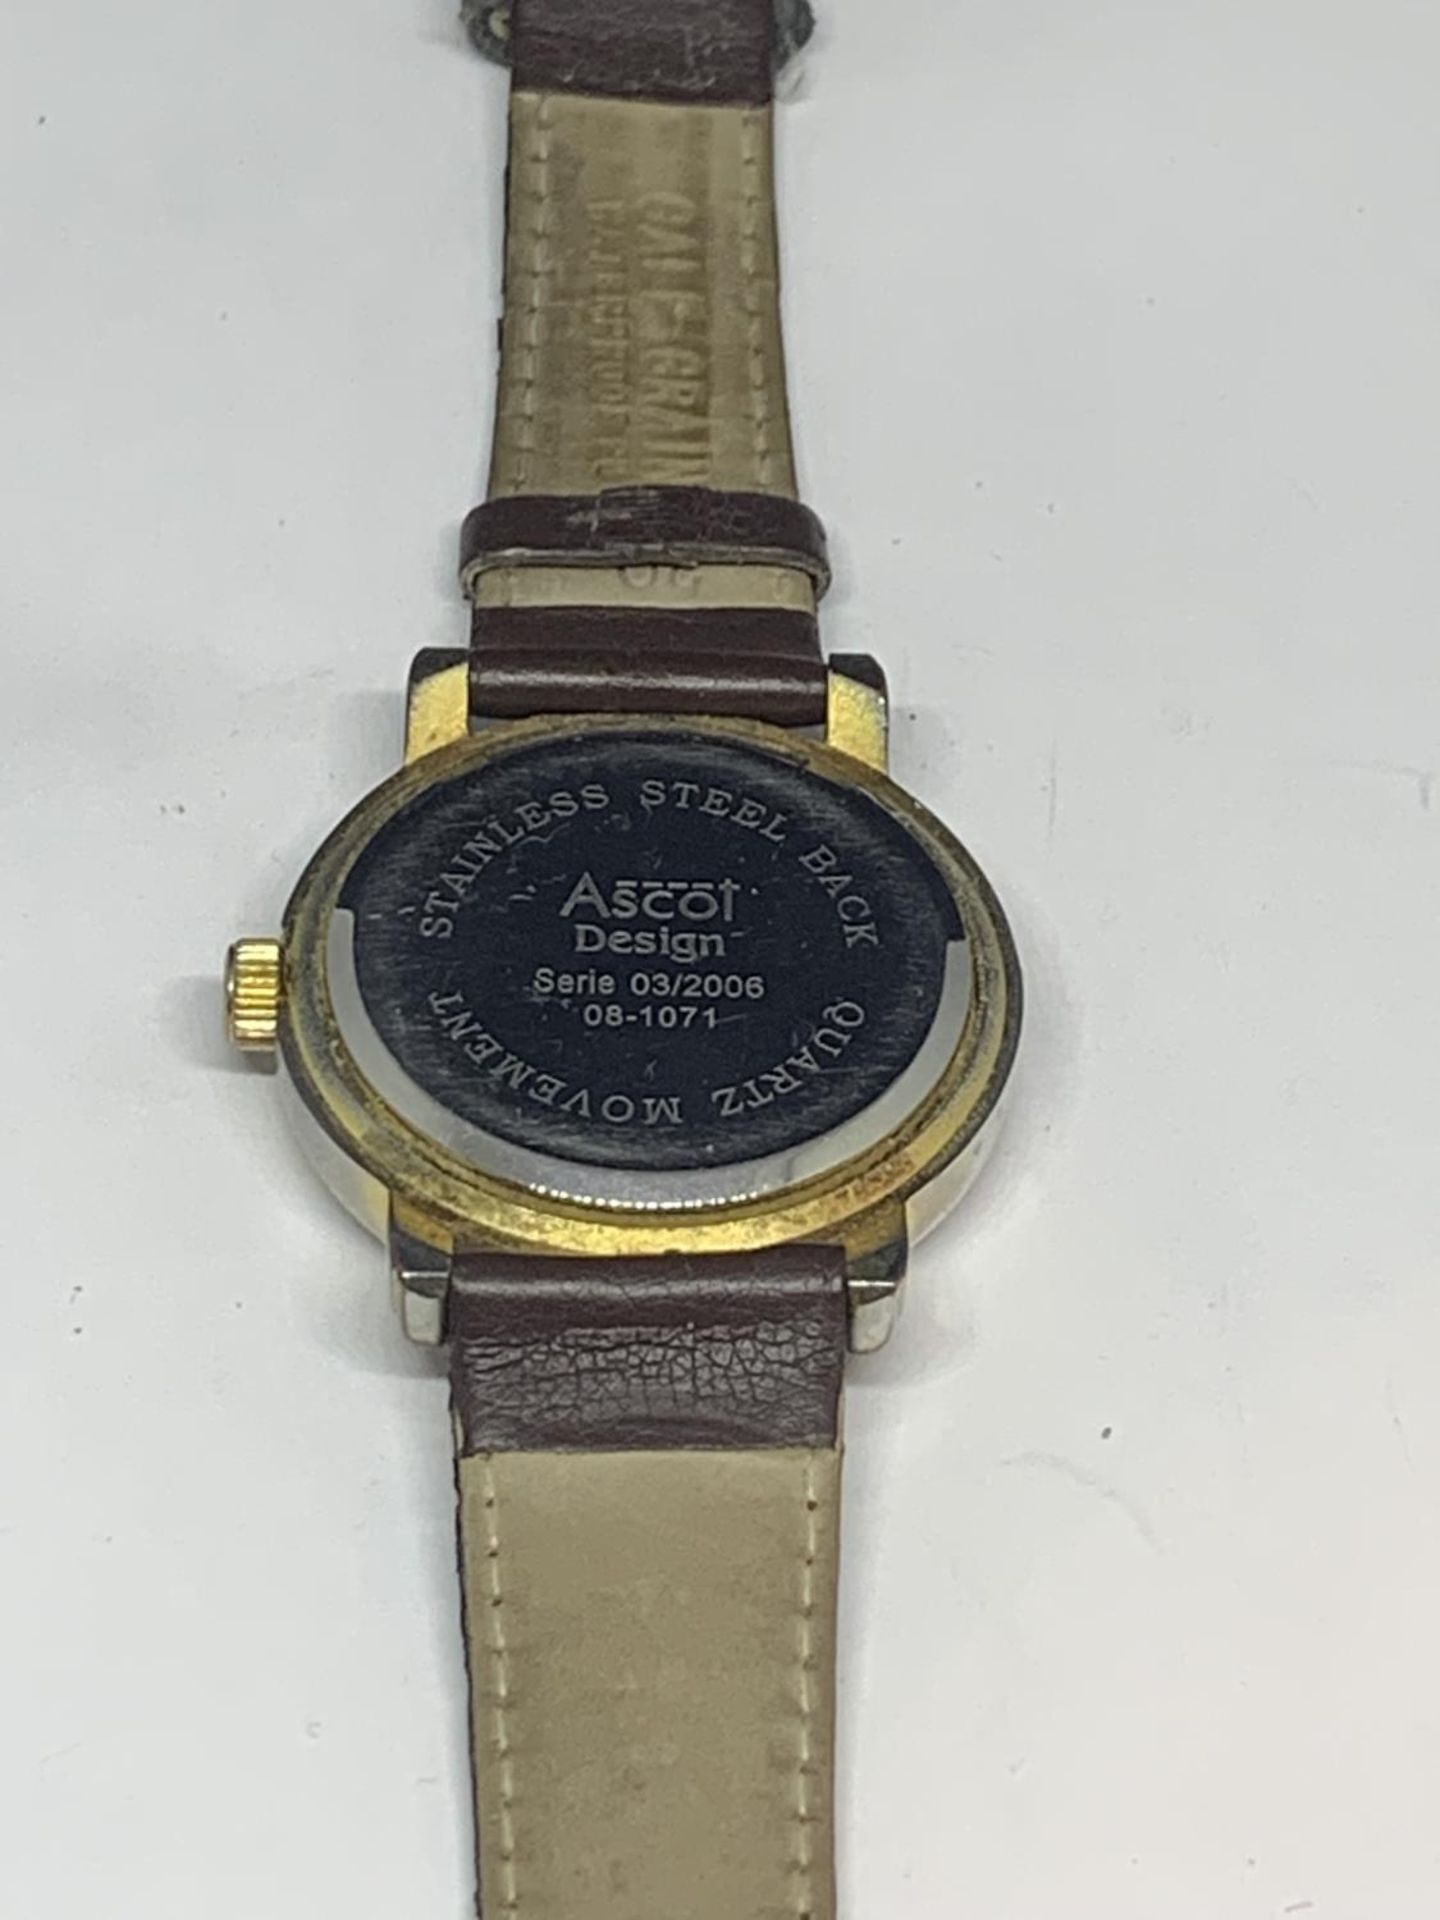 AN ASCOT CALENDAR WRIST WATCH WITH BROWN LEATHER STRAP SEEN WORKING BUT NO WARRANTY - Image 3 of 3